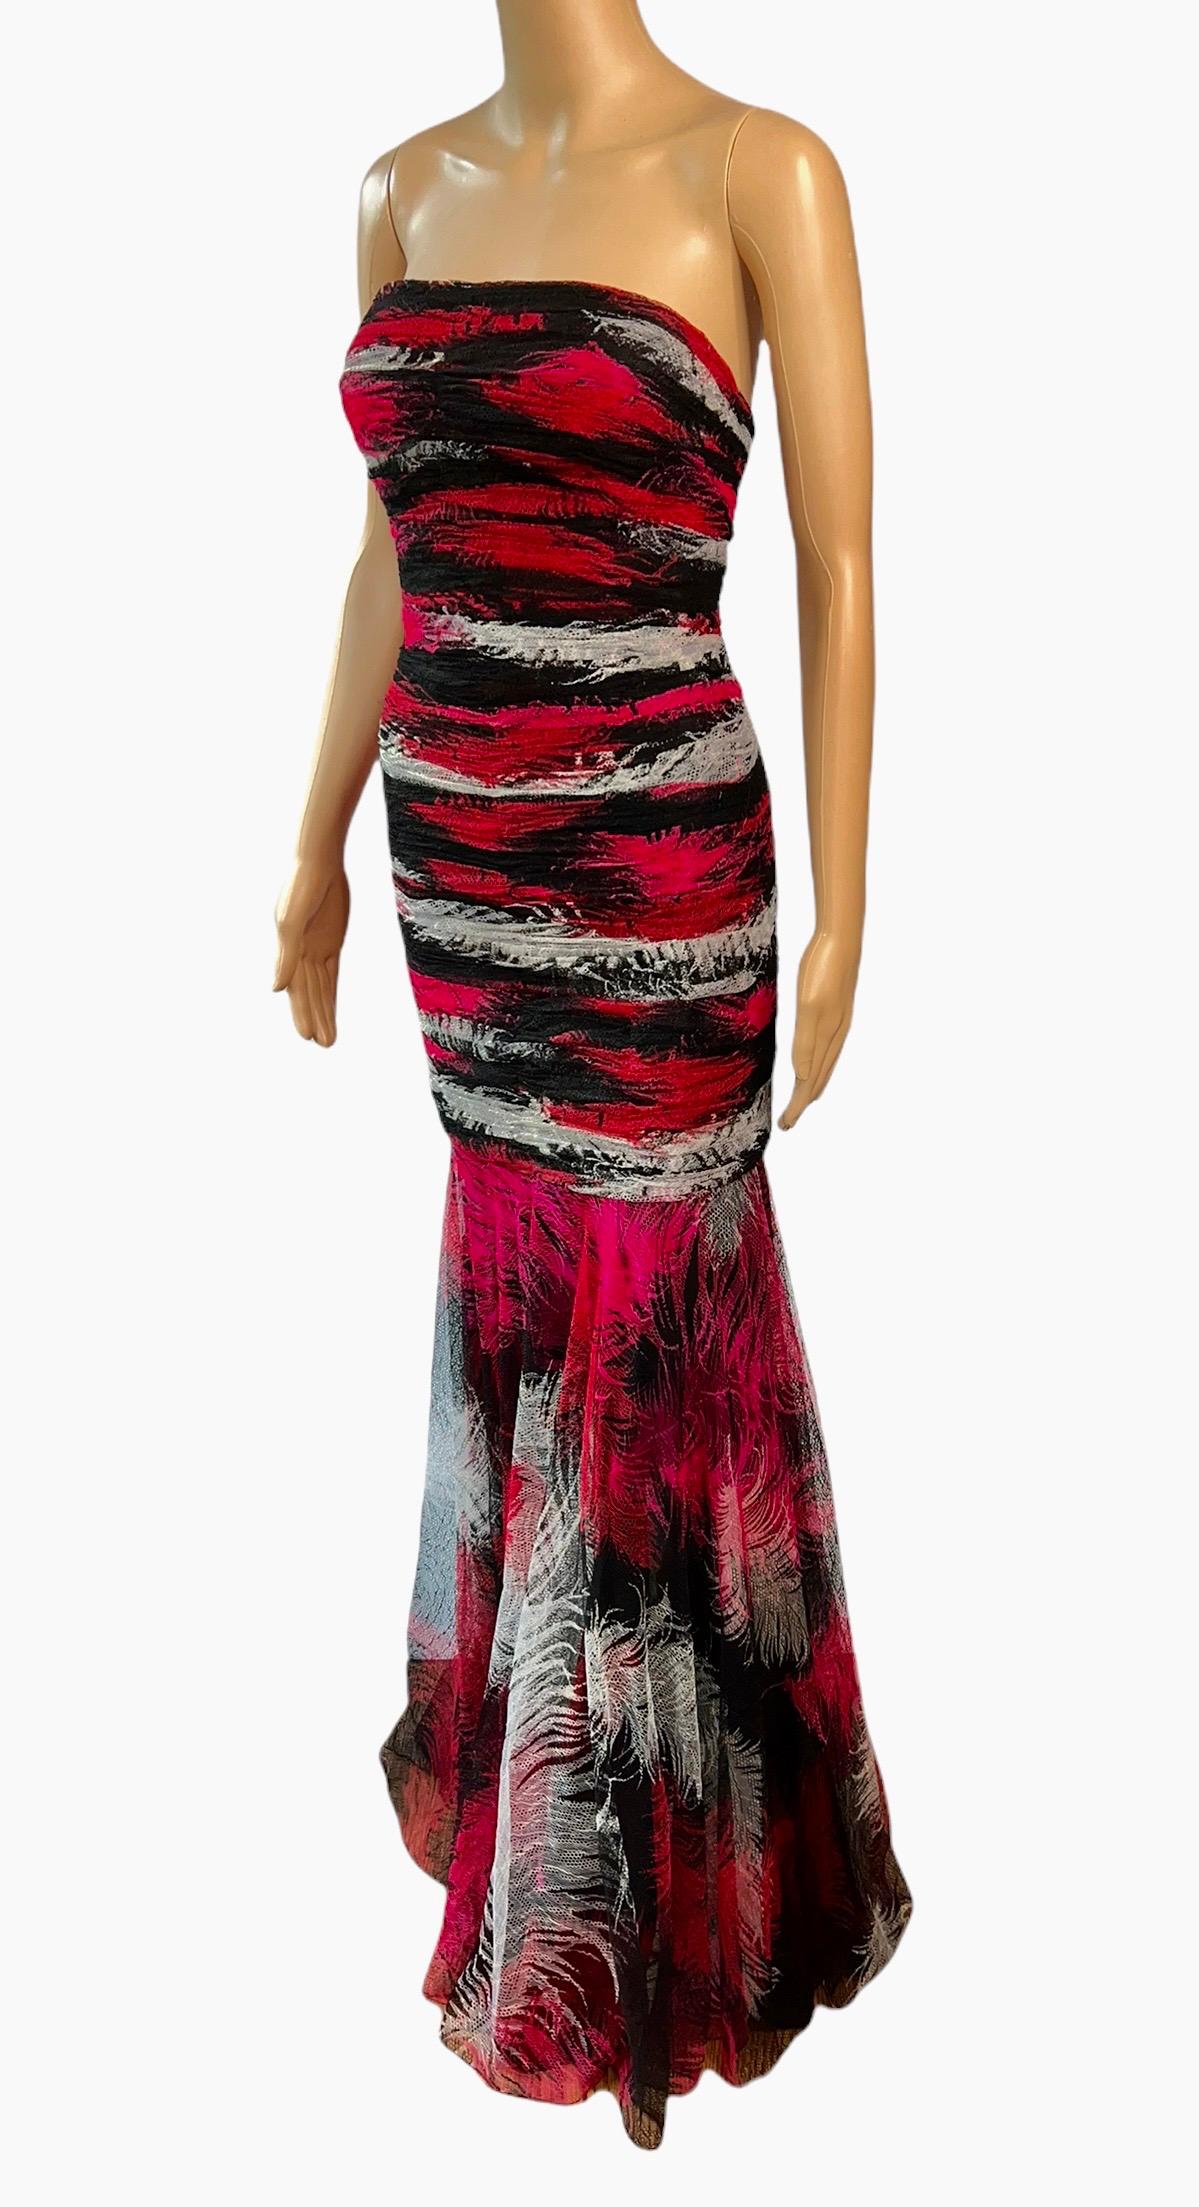 Gianni Versace F/W 2001 Runway Bustier Feather Print Silk Evening Dress Gown For Sale 3